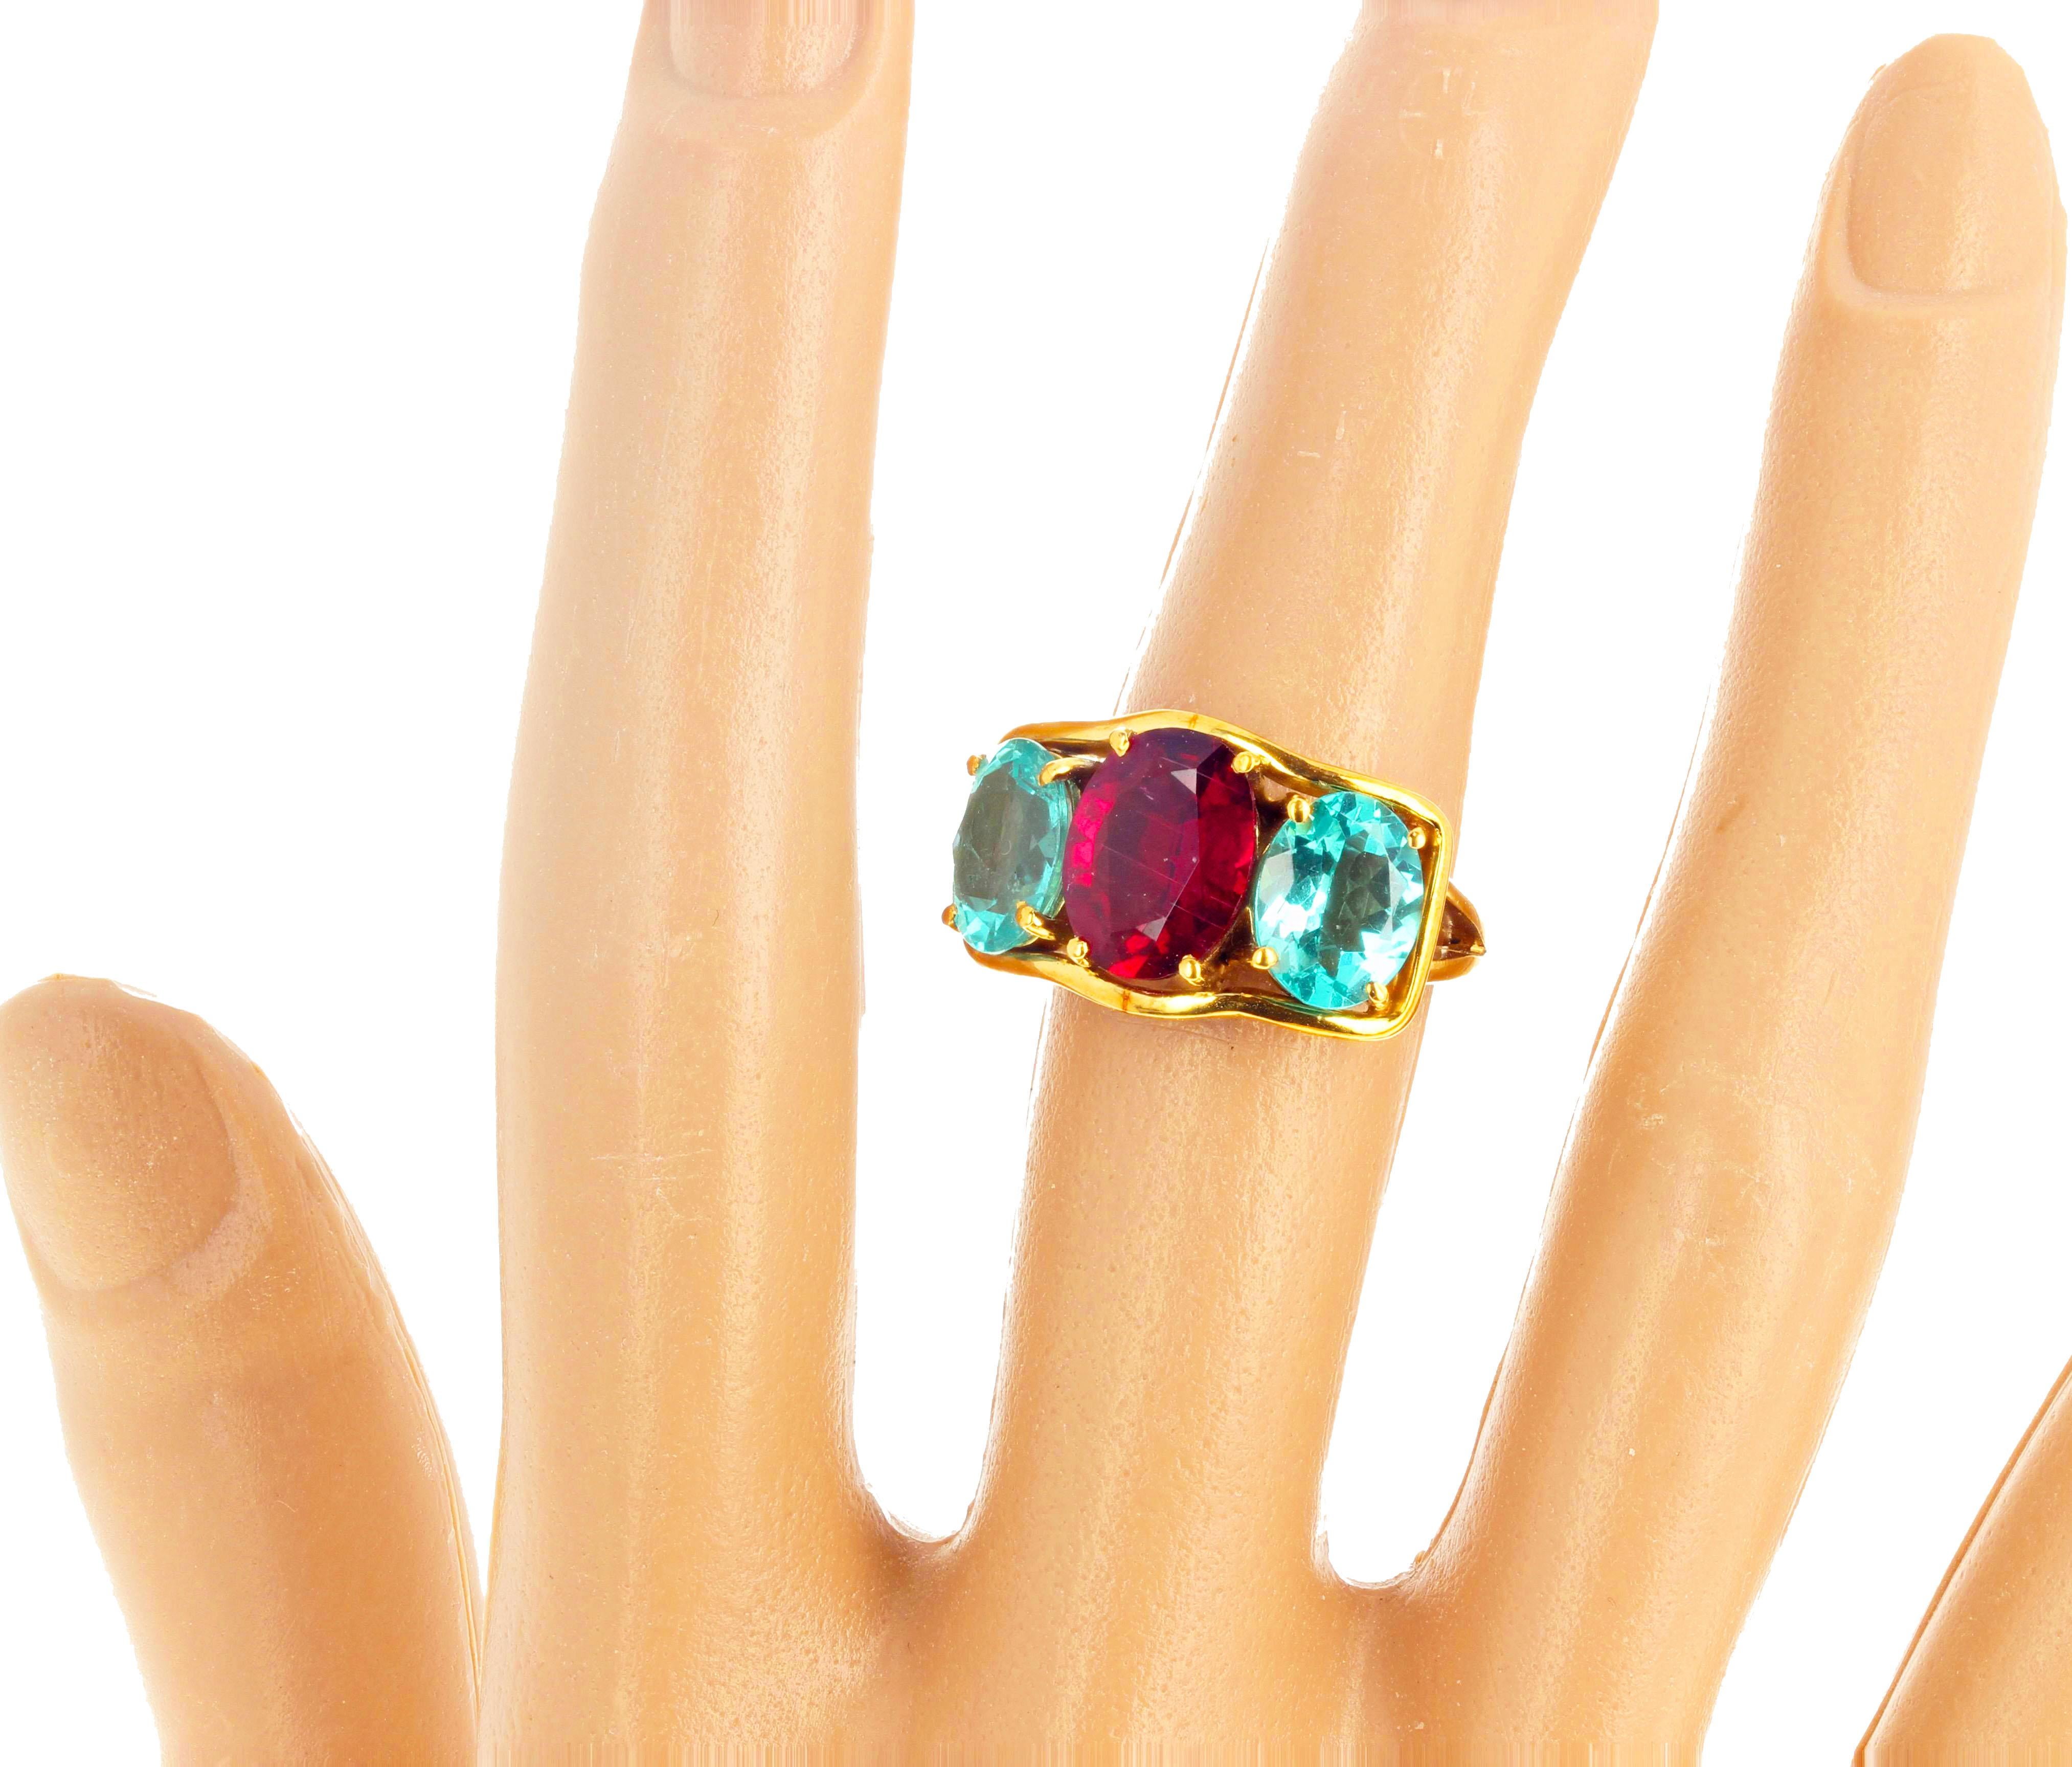 Beautiful classic 3 carat natural red Rubelite Tourmaline enhanced with a 1.89 Carat natural Apatite on each side set in this lovely 18Kt yellow gold ring size 7 (sizable for free).  The Sweat Heart ring will forever be cherished by the one you give